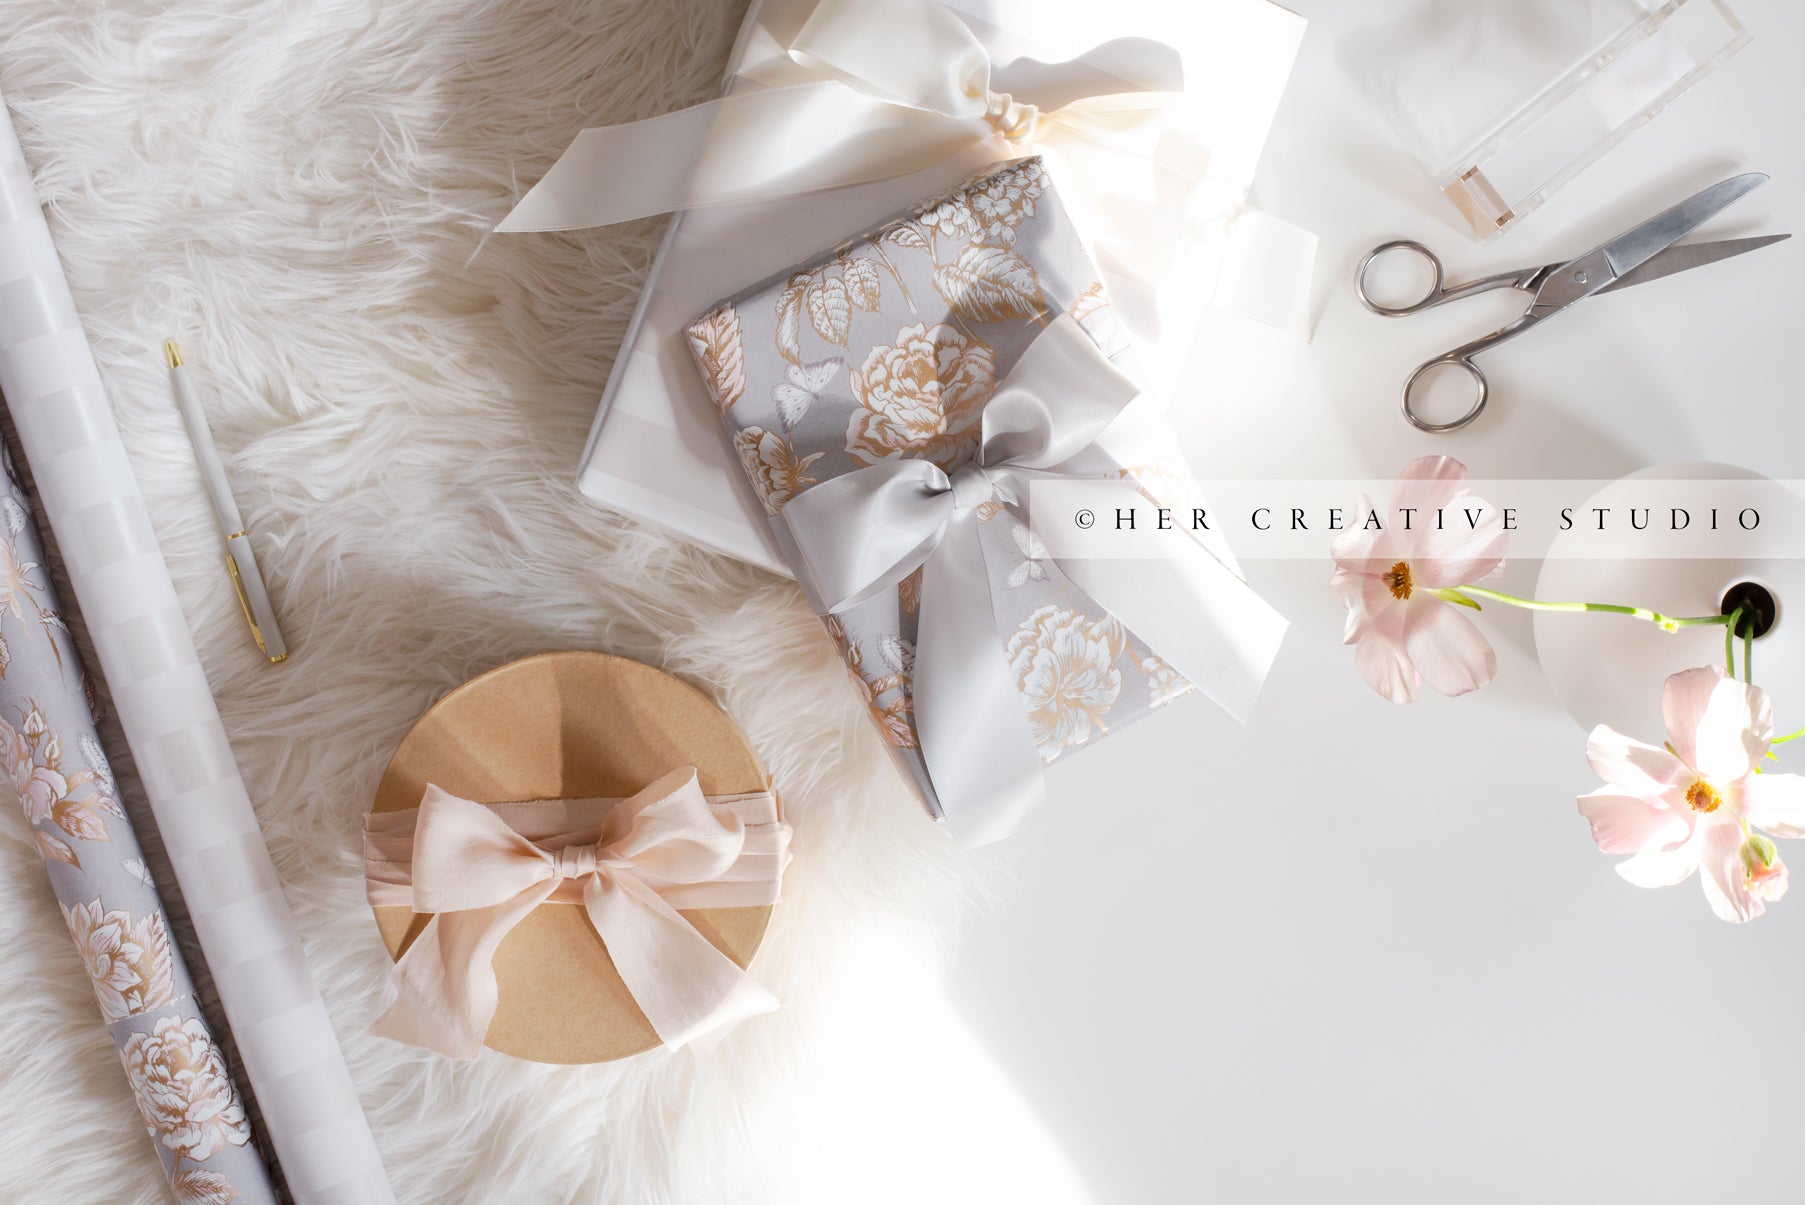 Gift wrapping with boxes and scissors Stock Photo by ©karandaev